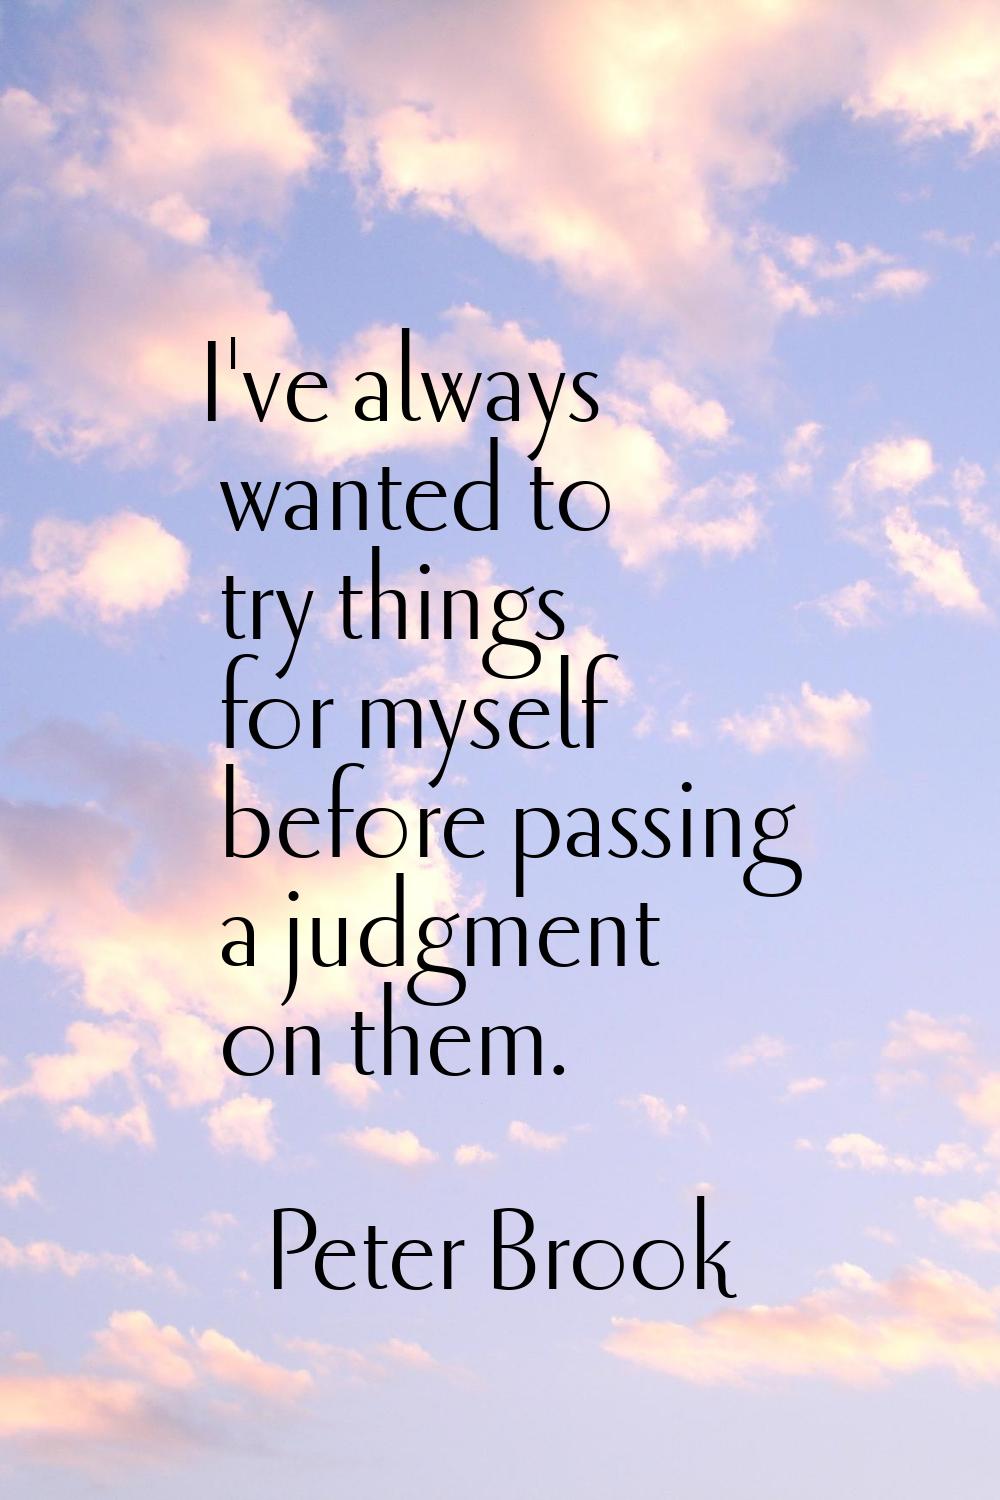 I've always wanted to try things for myself before passing a judgment on them.